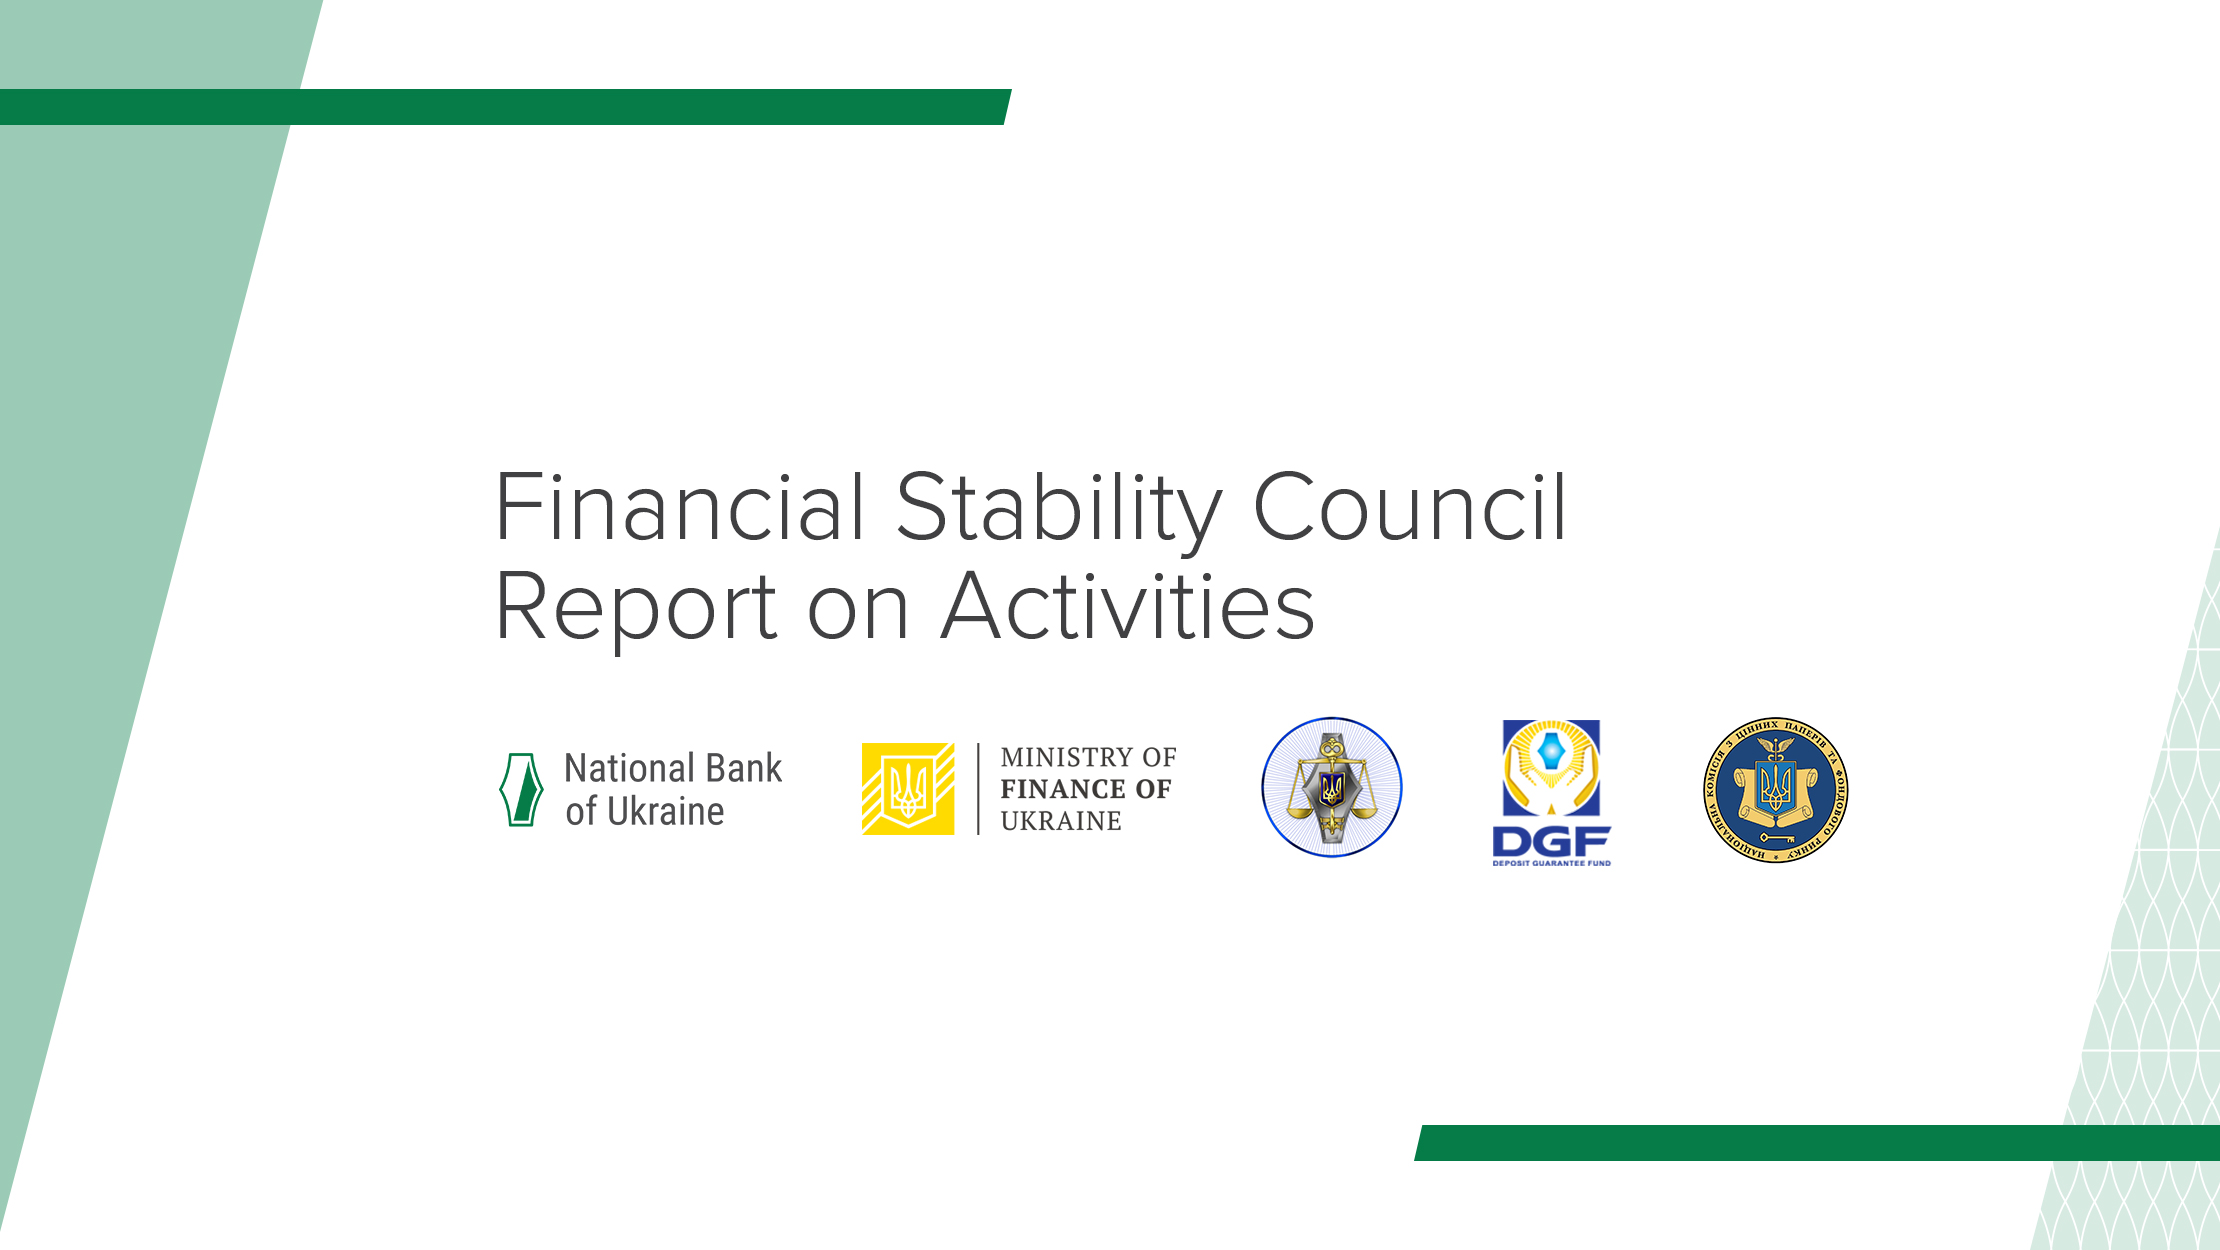 Financial Stability Council Report on Activities (August 2018 – July 2019)